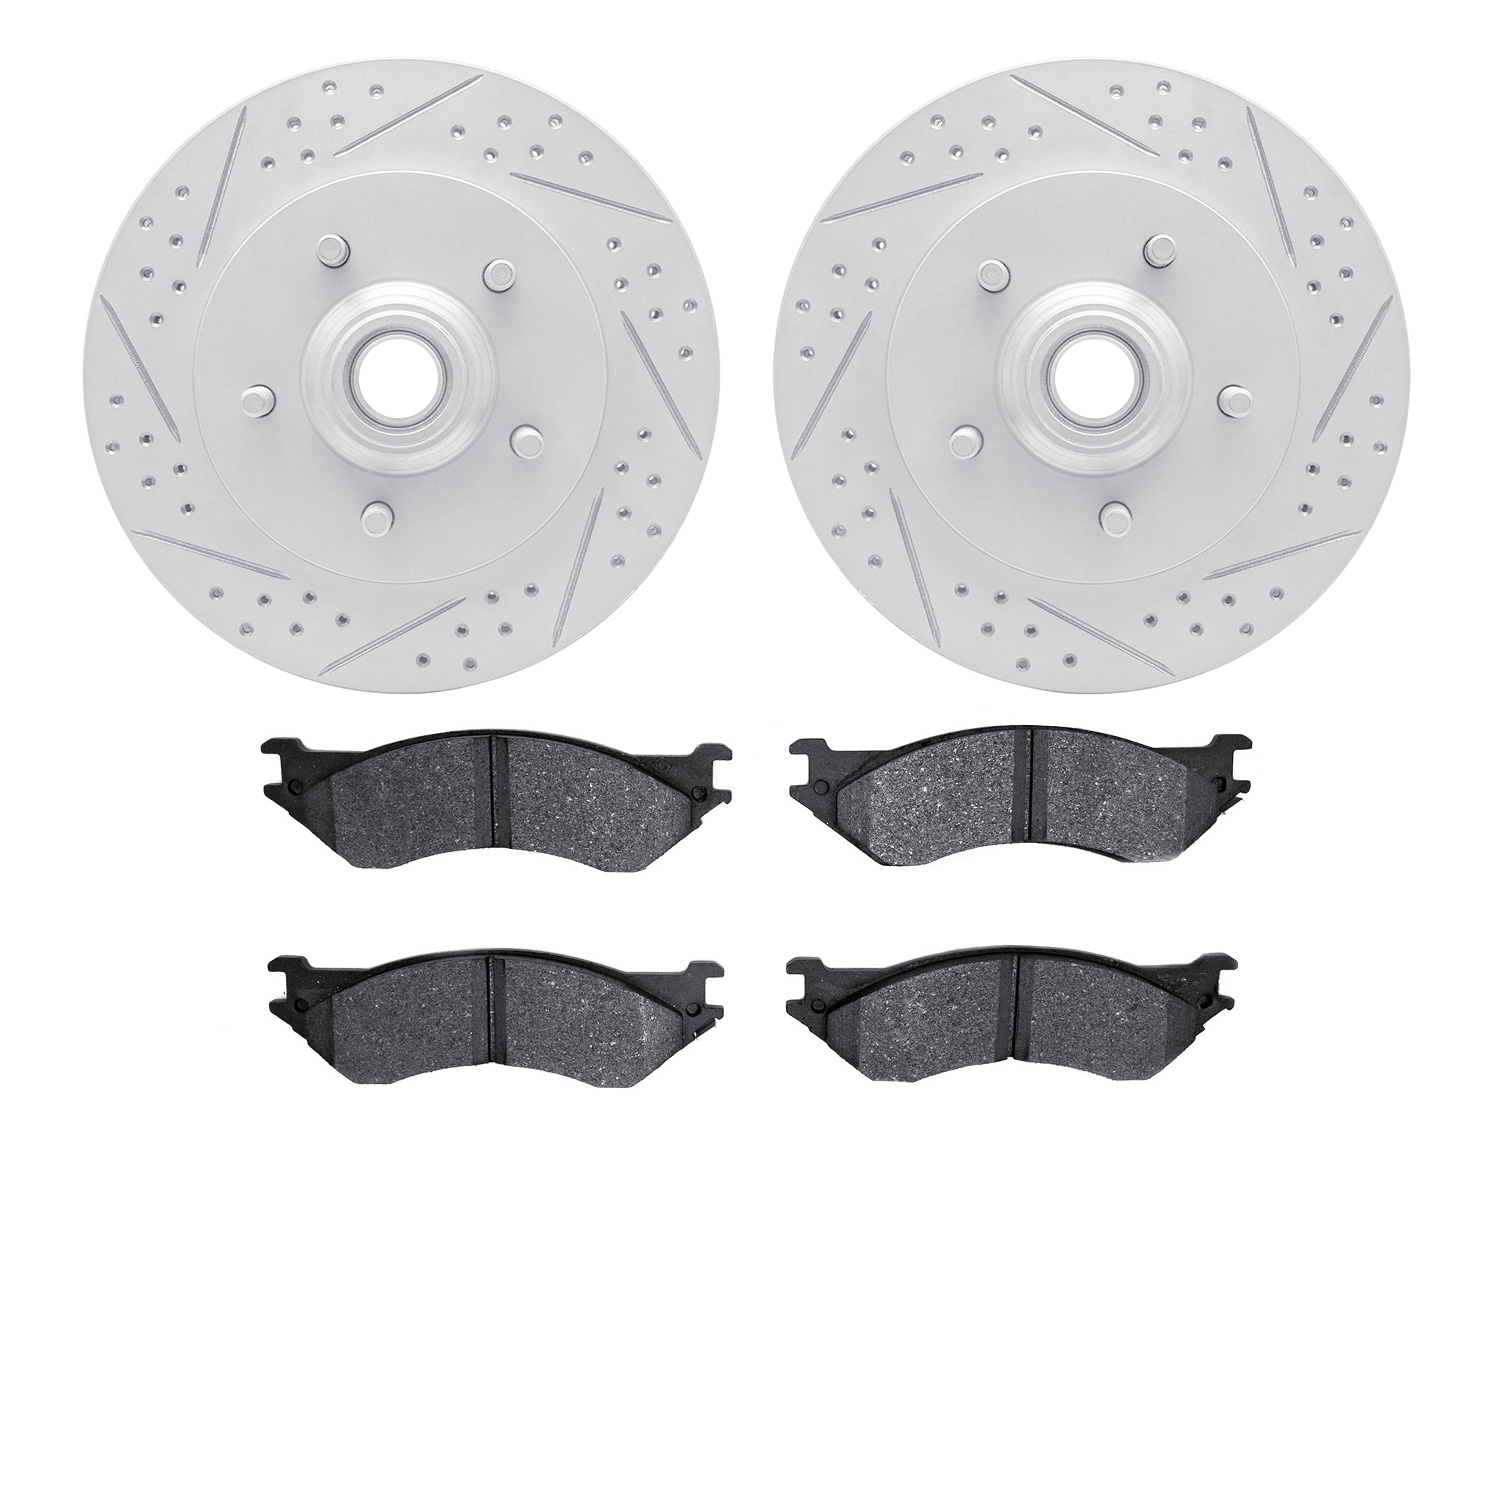 2402-54032 Geoperformance Drilled/Slotted Brake Rotors with Ultimate-Duty Brake Pads Kit, 1999-2004 Ford/Lincoln/Mercury/Mazda,